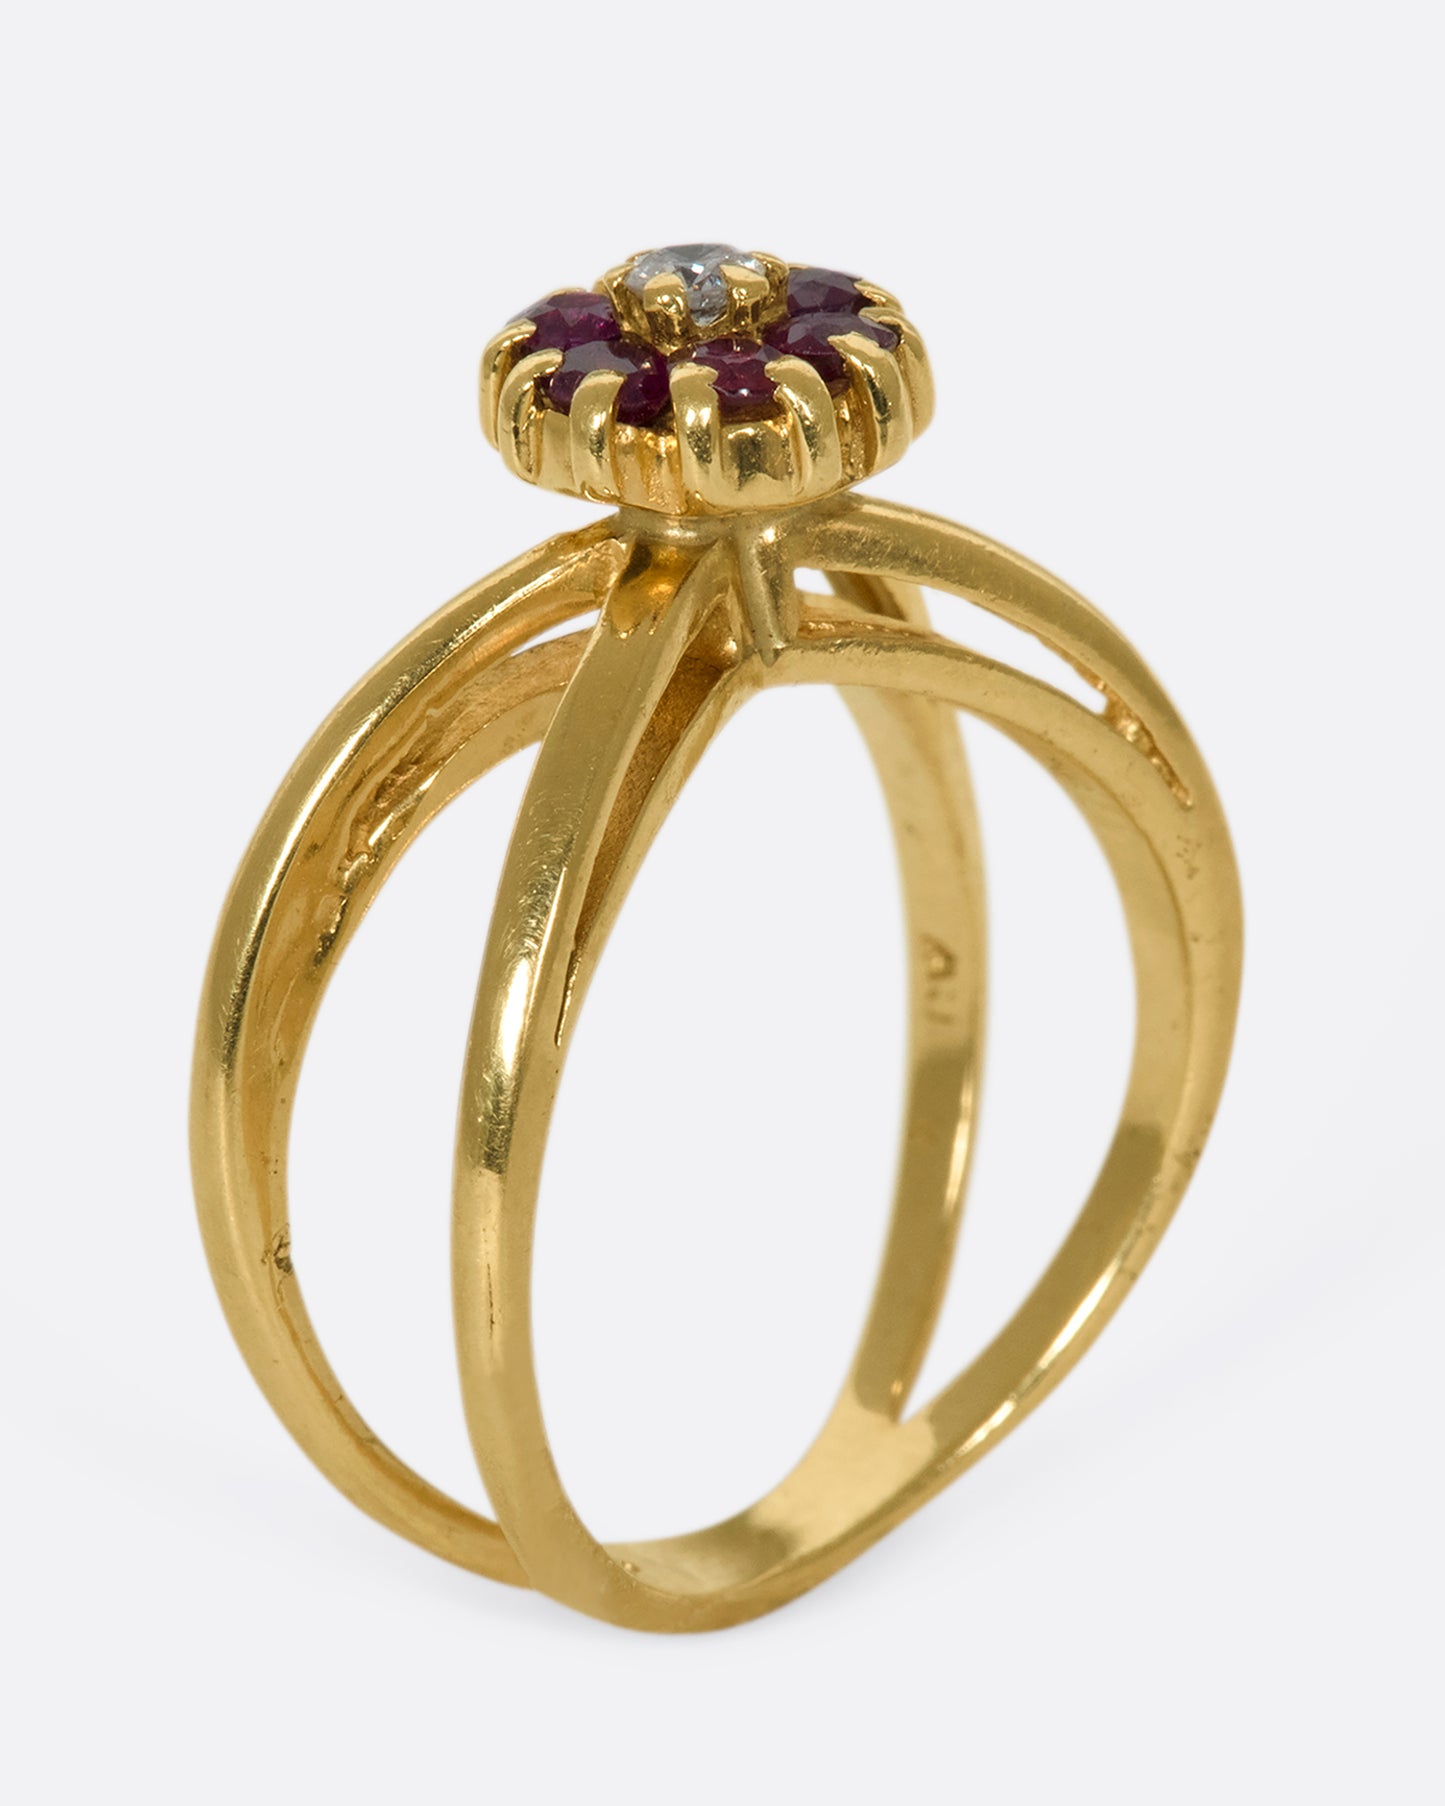 A view of a yellow gold double banded ring with a ruby and diamond flower in the center standing up on its band.